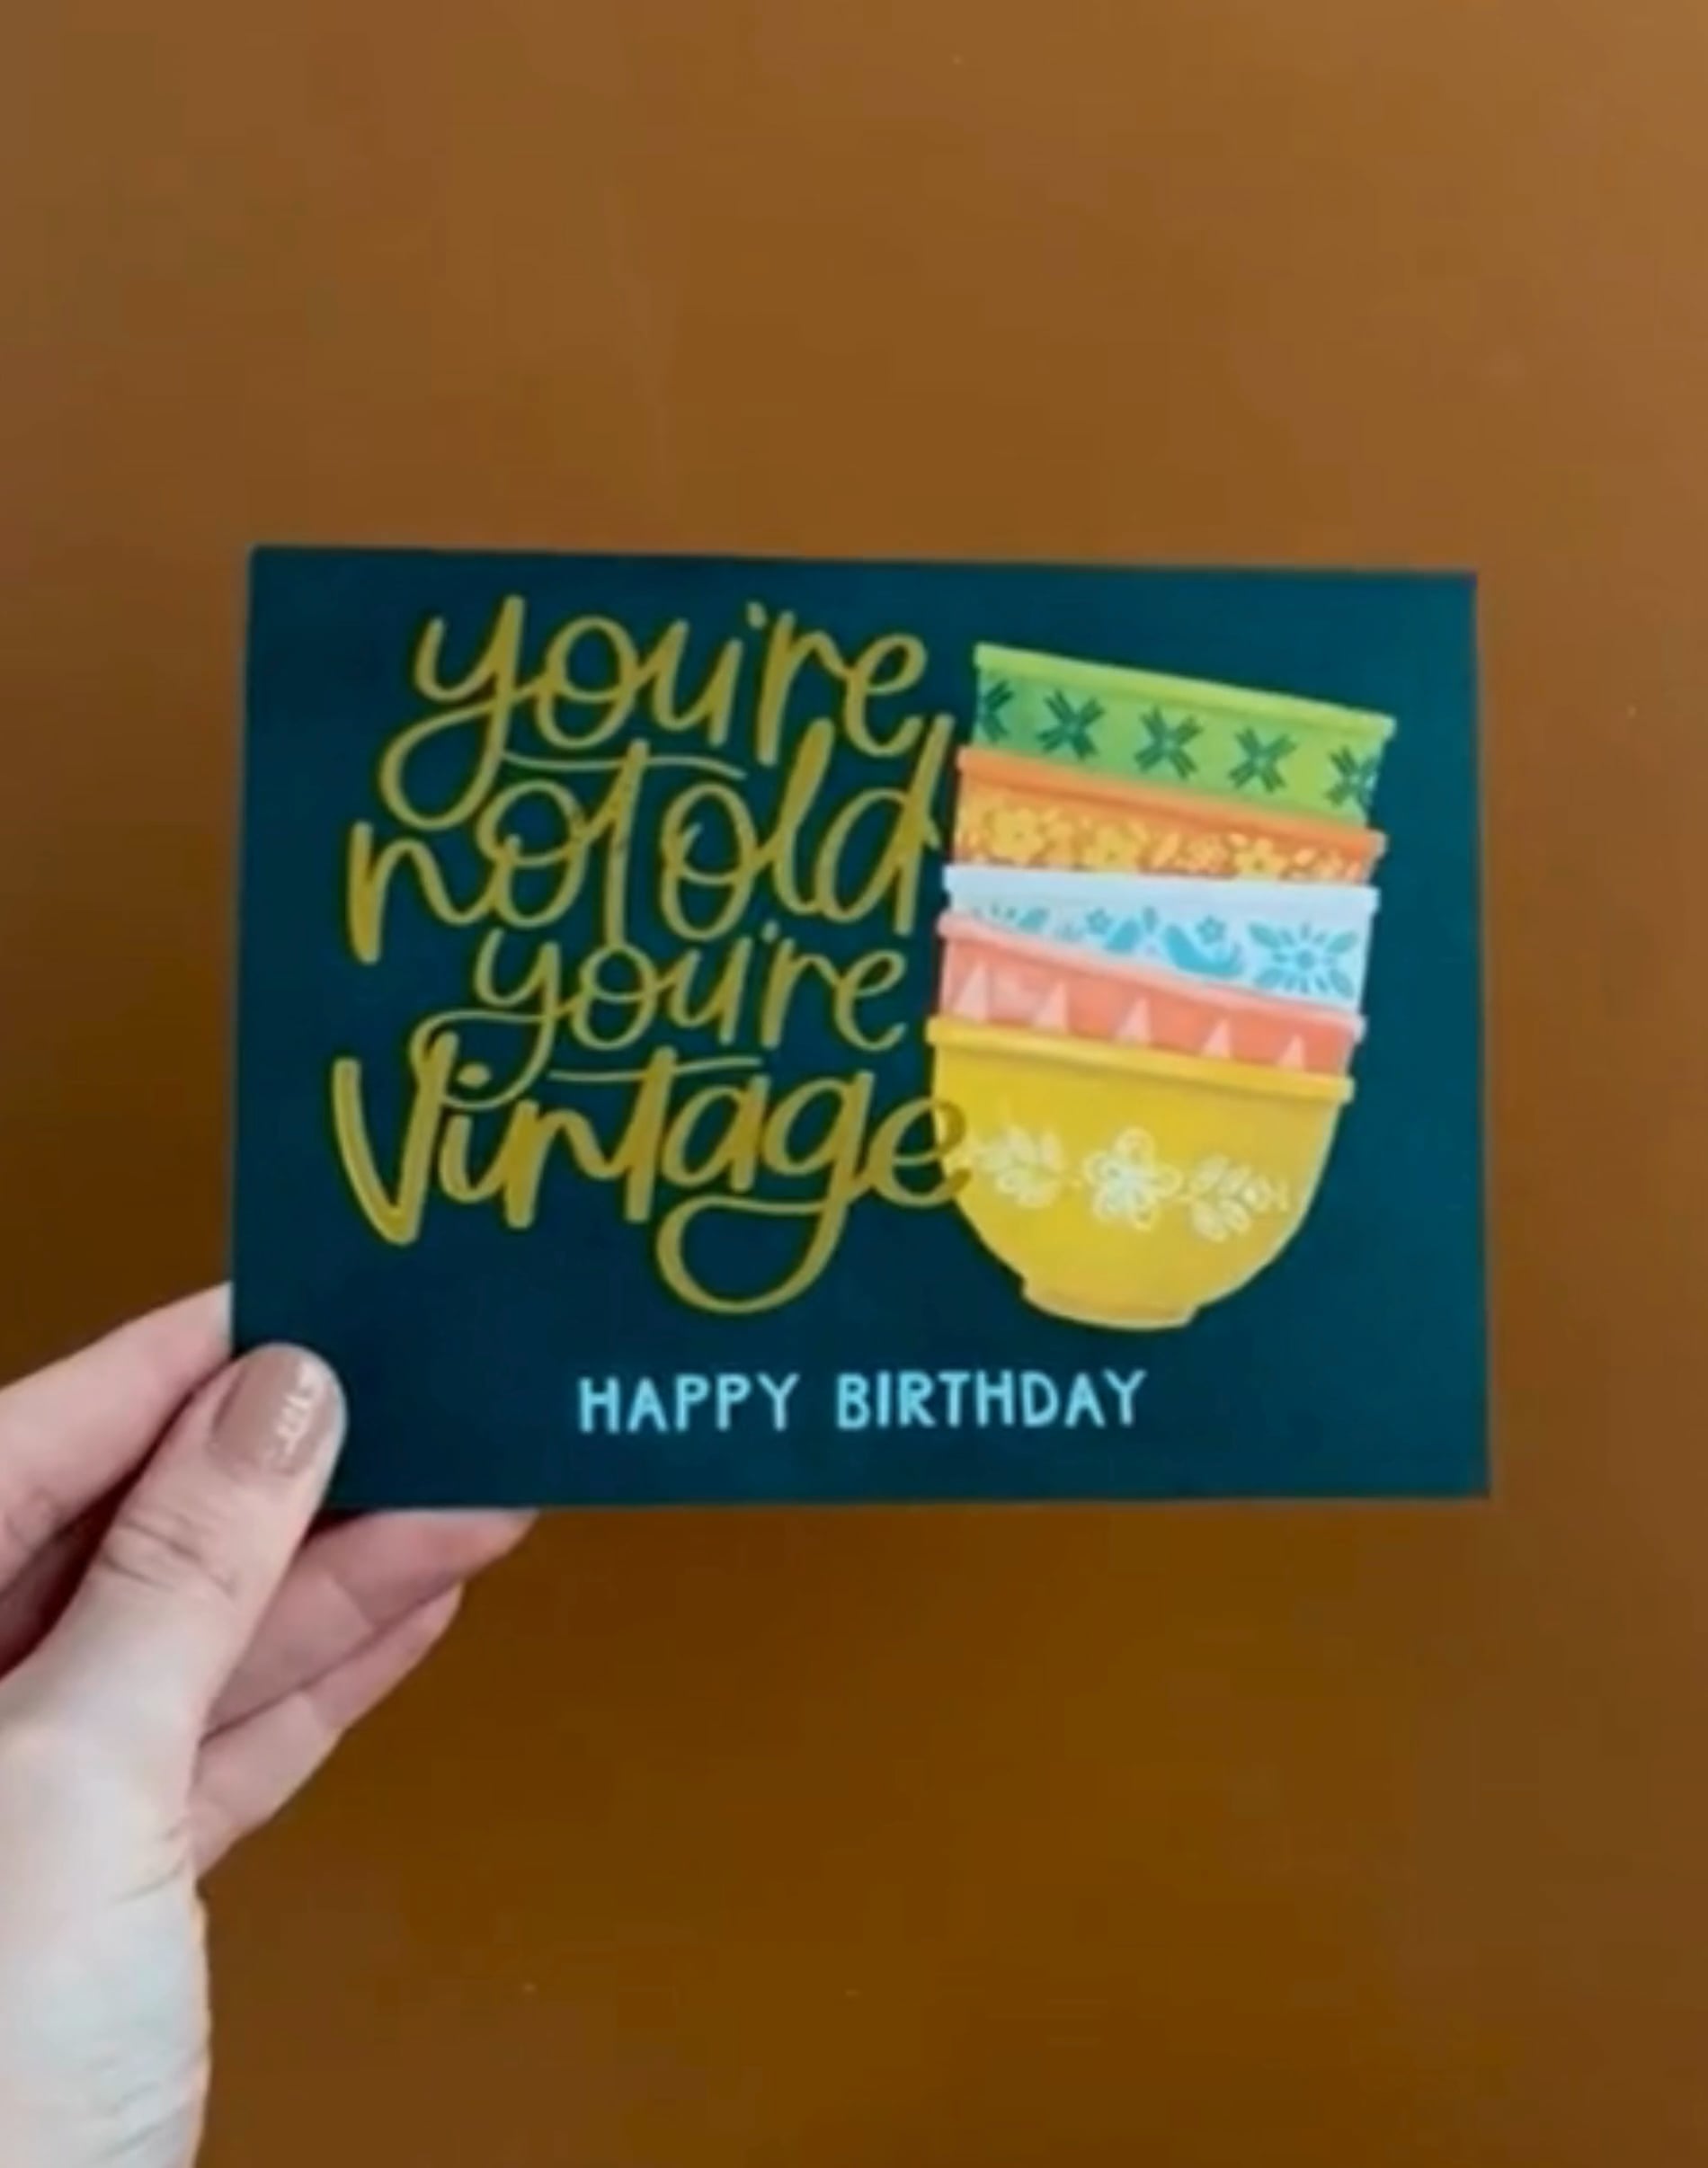 You're Not Old You're Vintage Birthday Greeting Card image